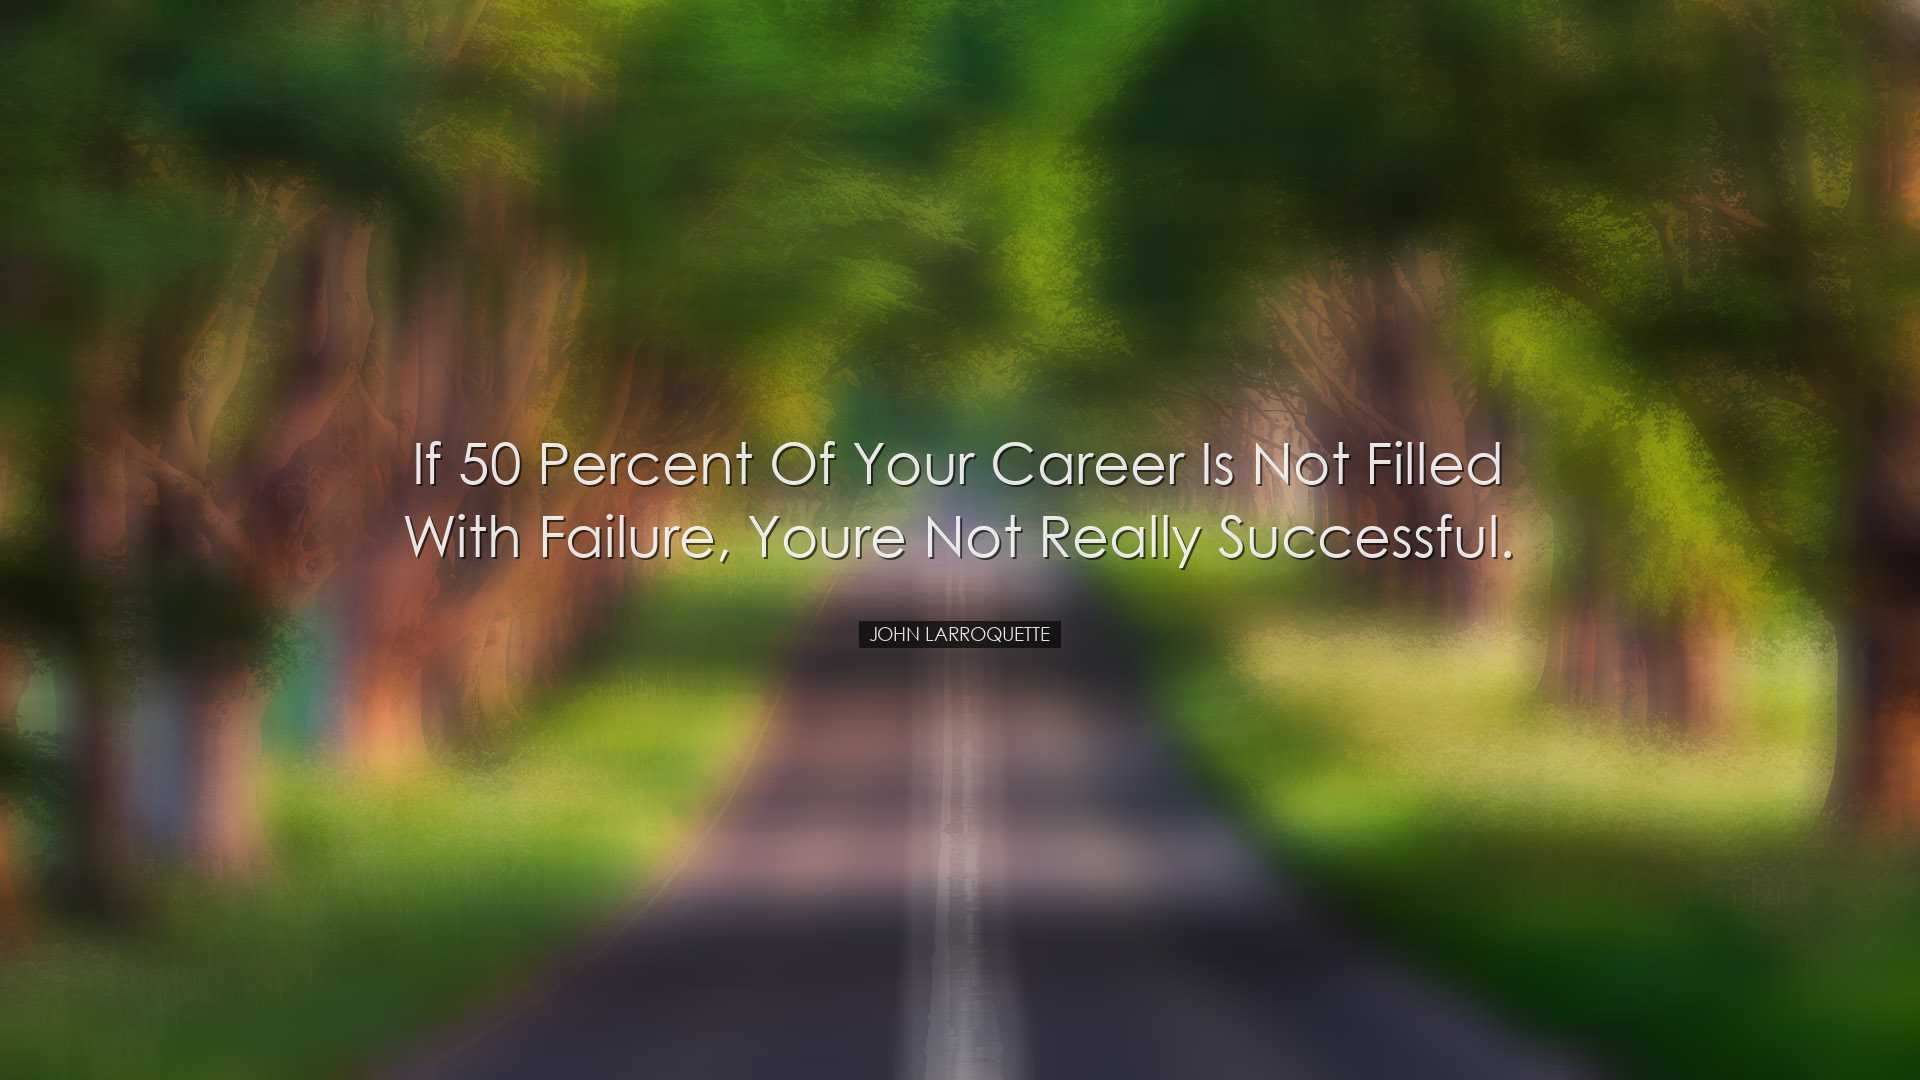 If 50 percent of your career is not filled with failure, youre not